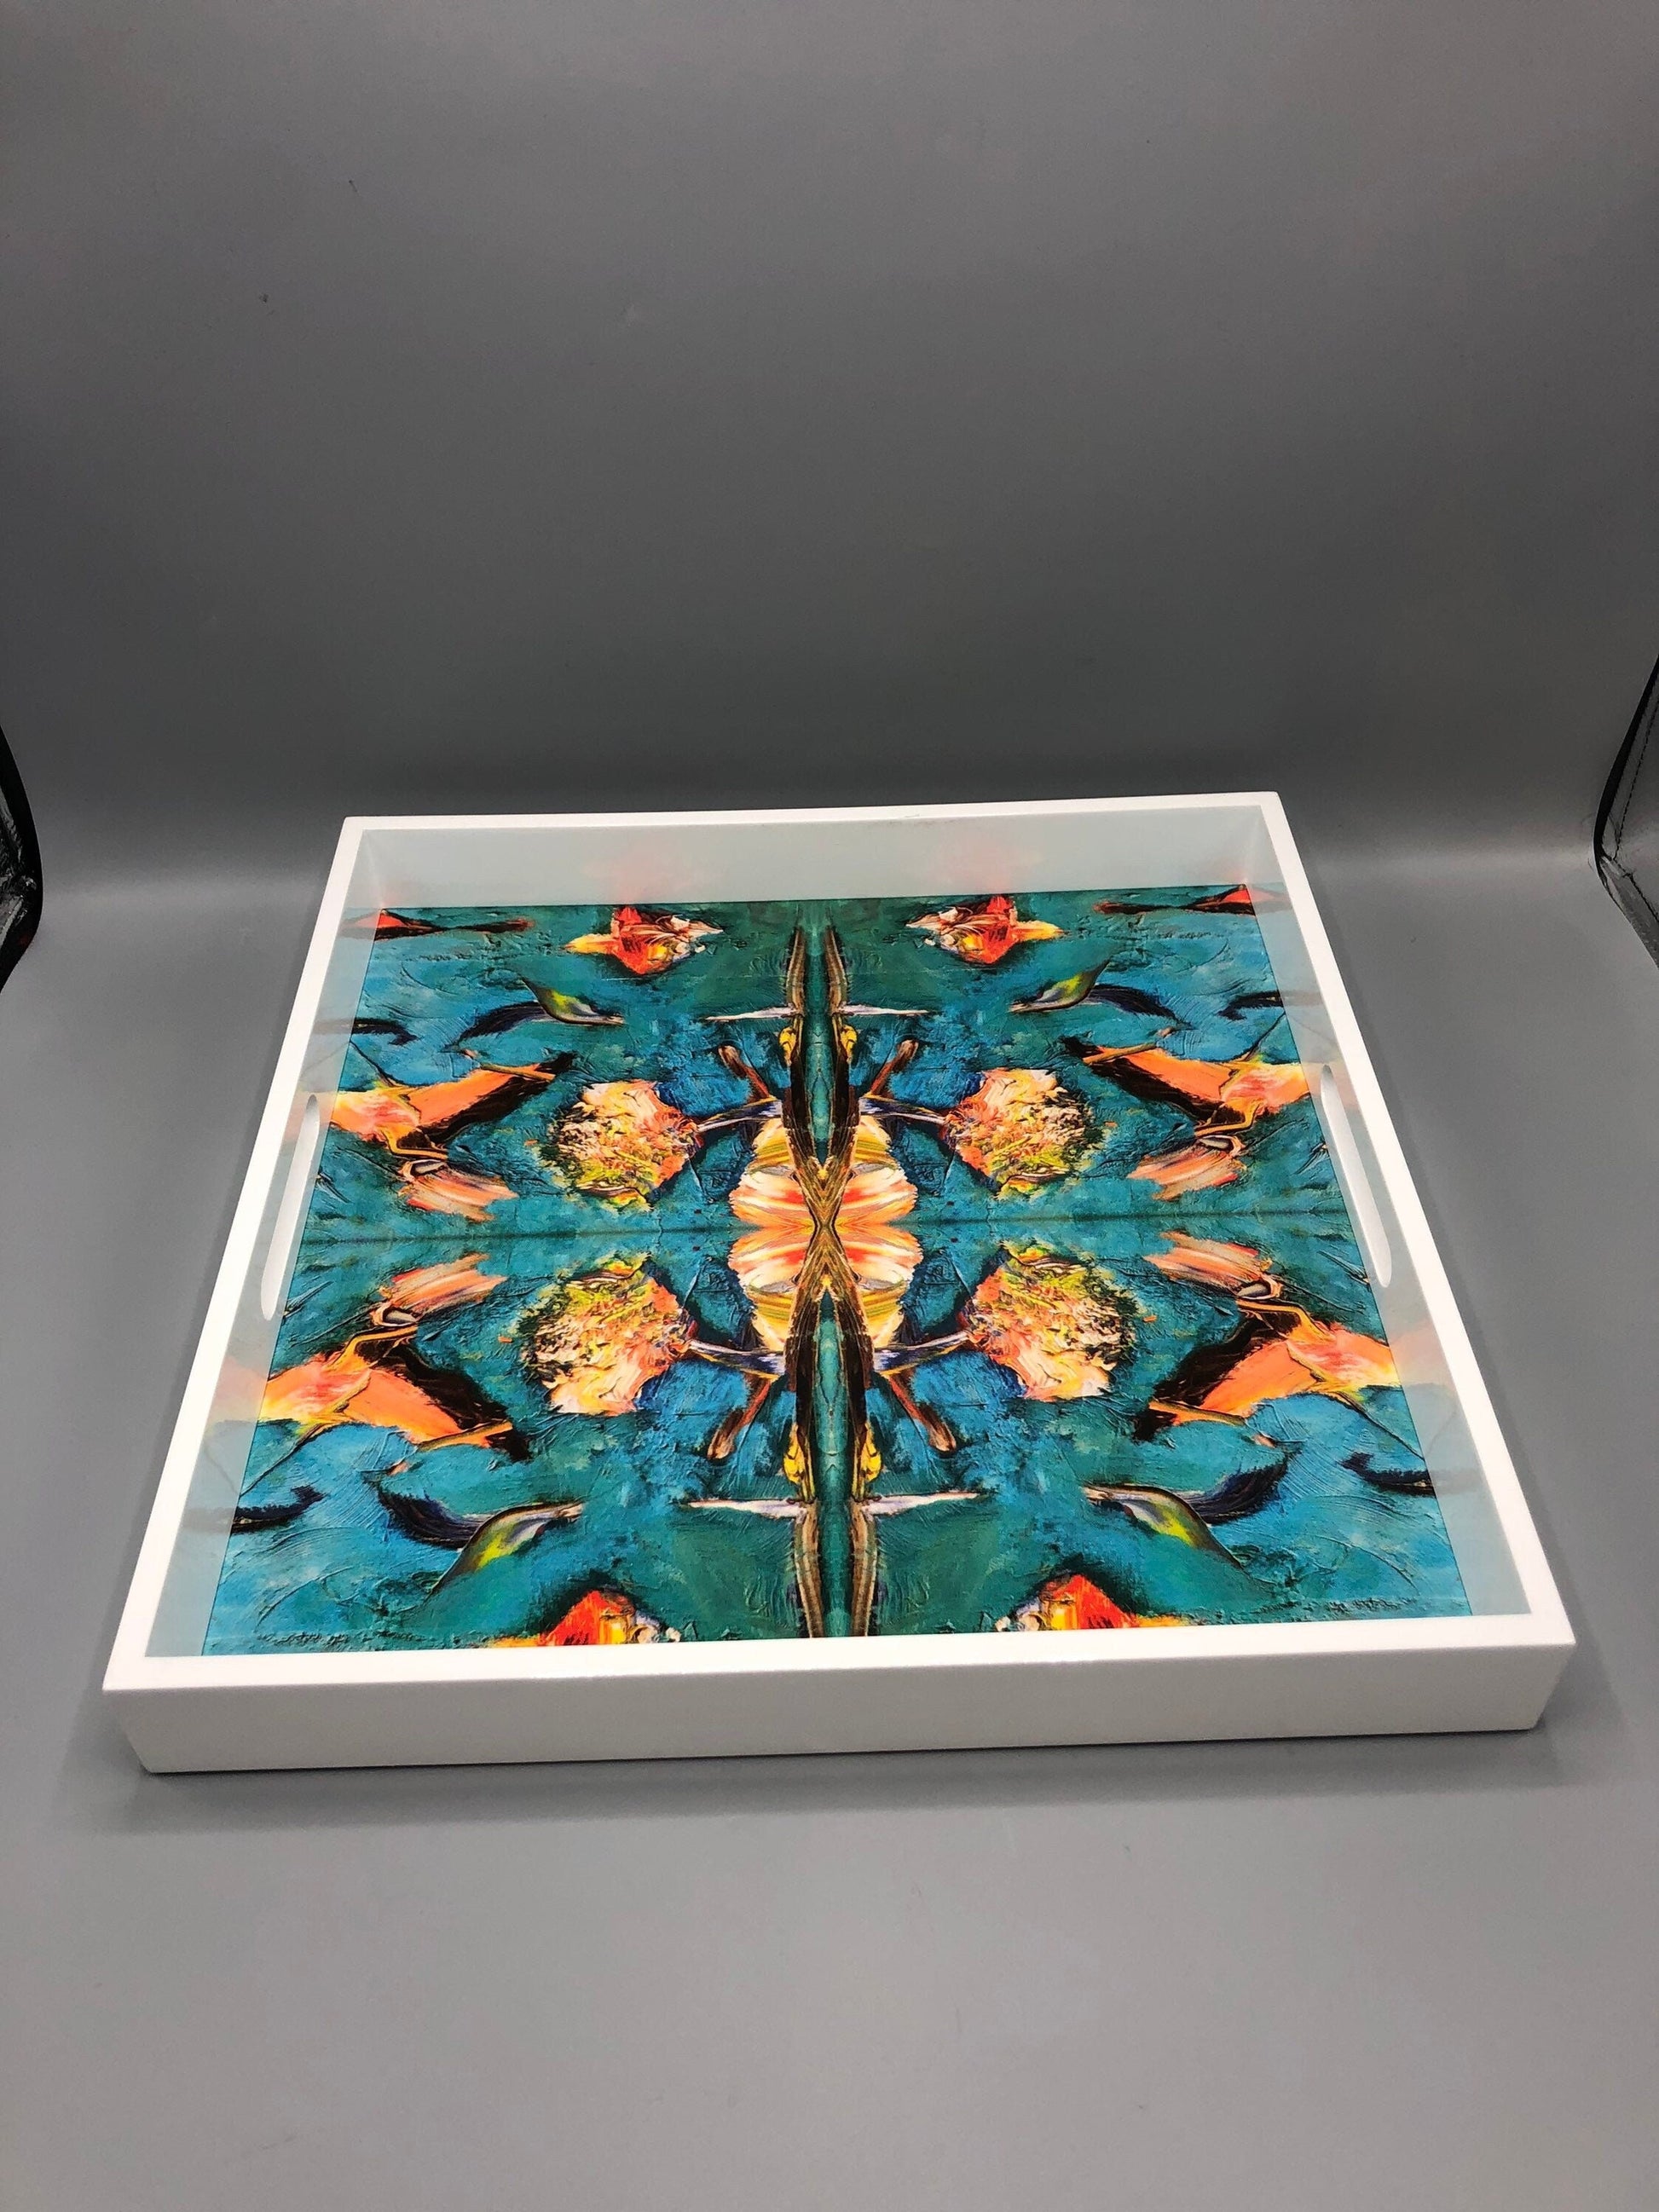 Handmade contemporary lacquer wood tray with multi color abstract titled: The Birds” designed by “Bruce Mishell”16” x 16” inches